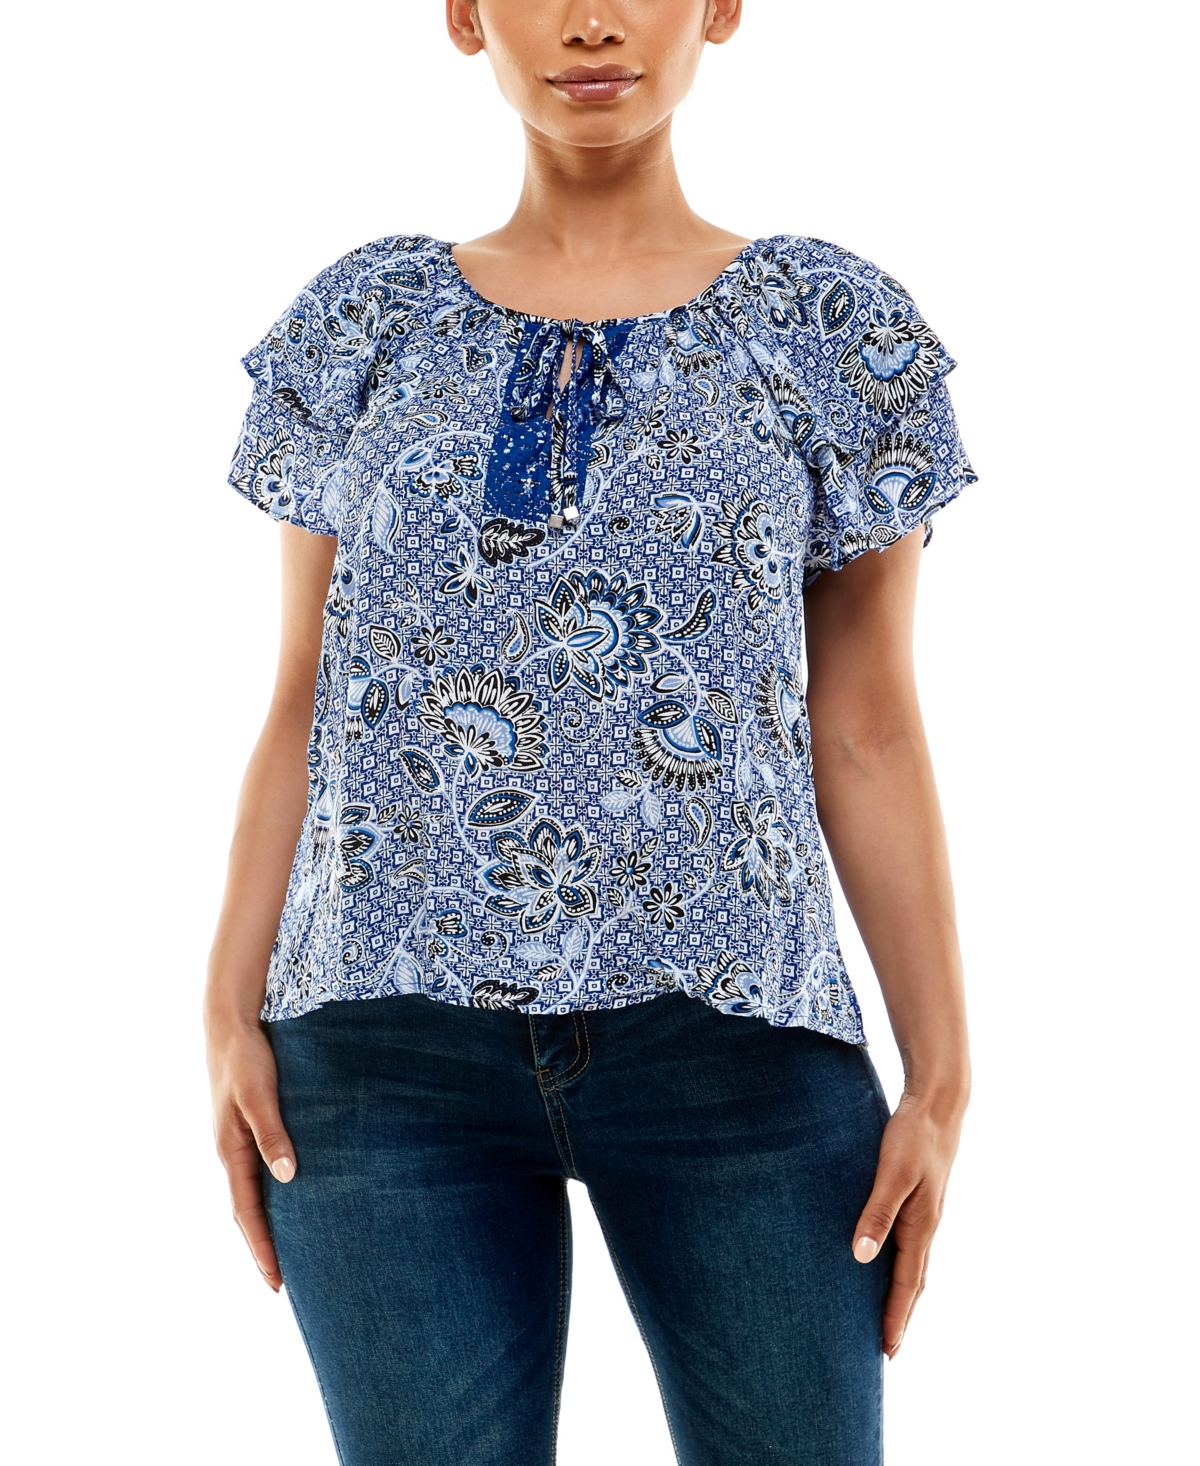 Women's Short Layered Sleeve Peasant Top - Moroccan Floral